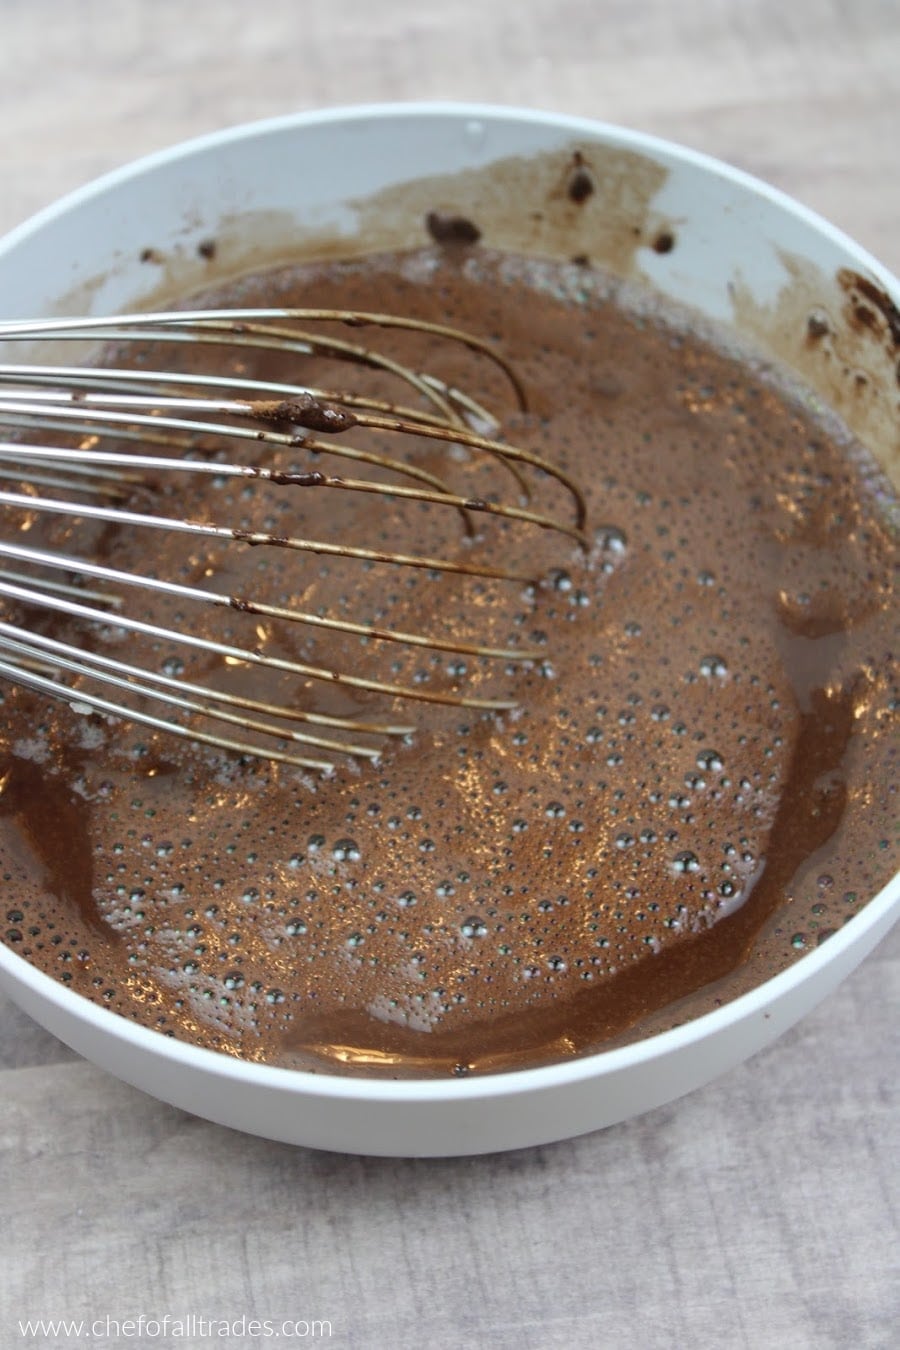 whisking the cocoa and water together